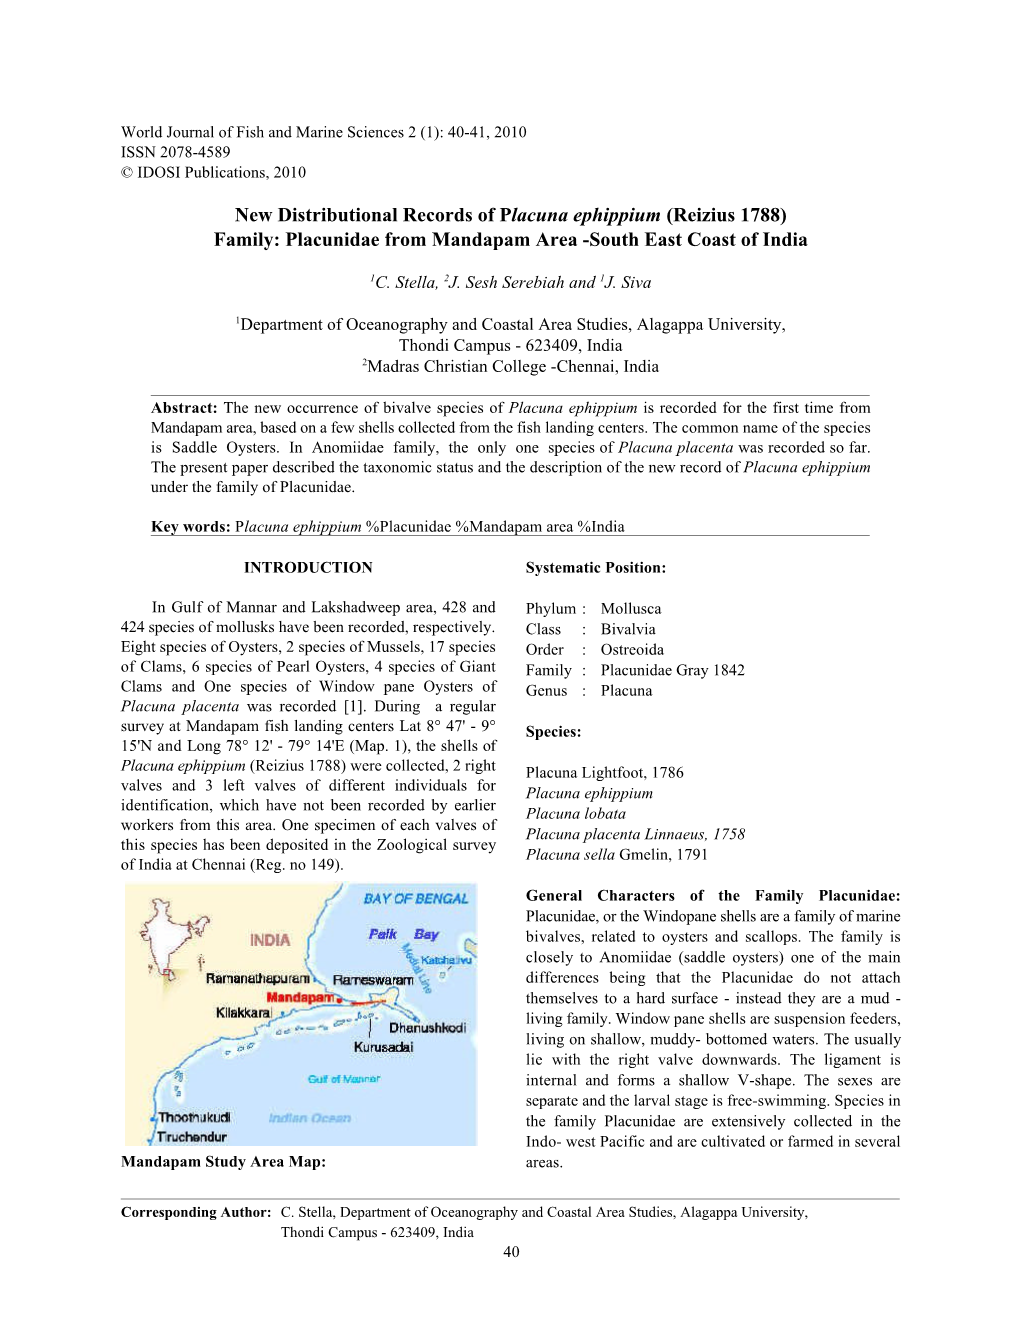 New Distributional Records of Placuna Ephippium (Reizius 1788) Family: Placunidae from Mandapam Area -South East Coast of India